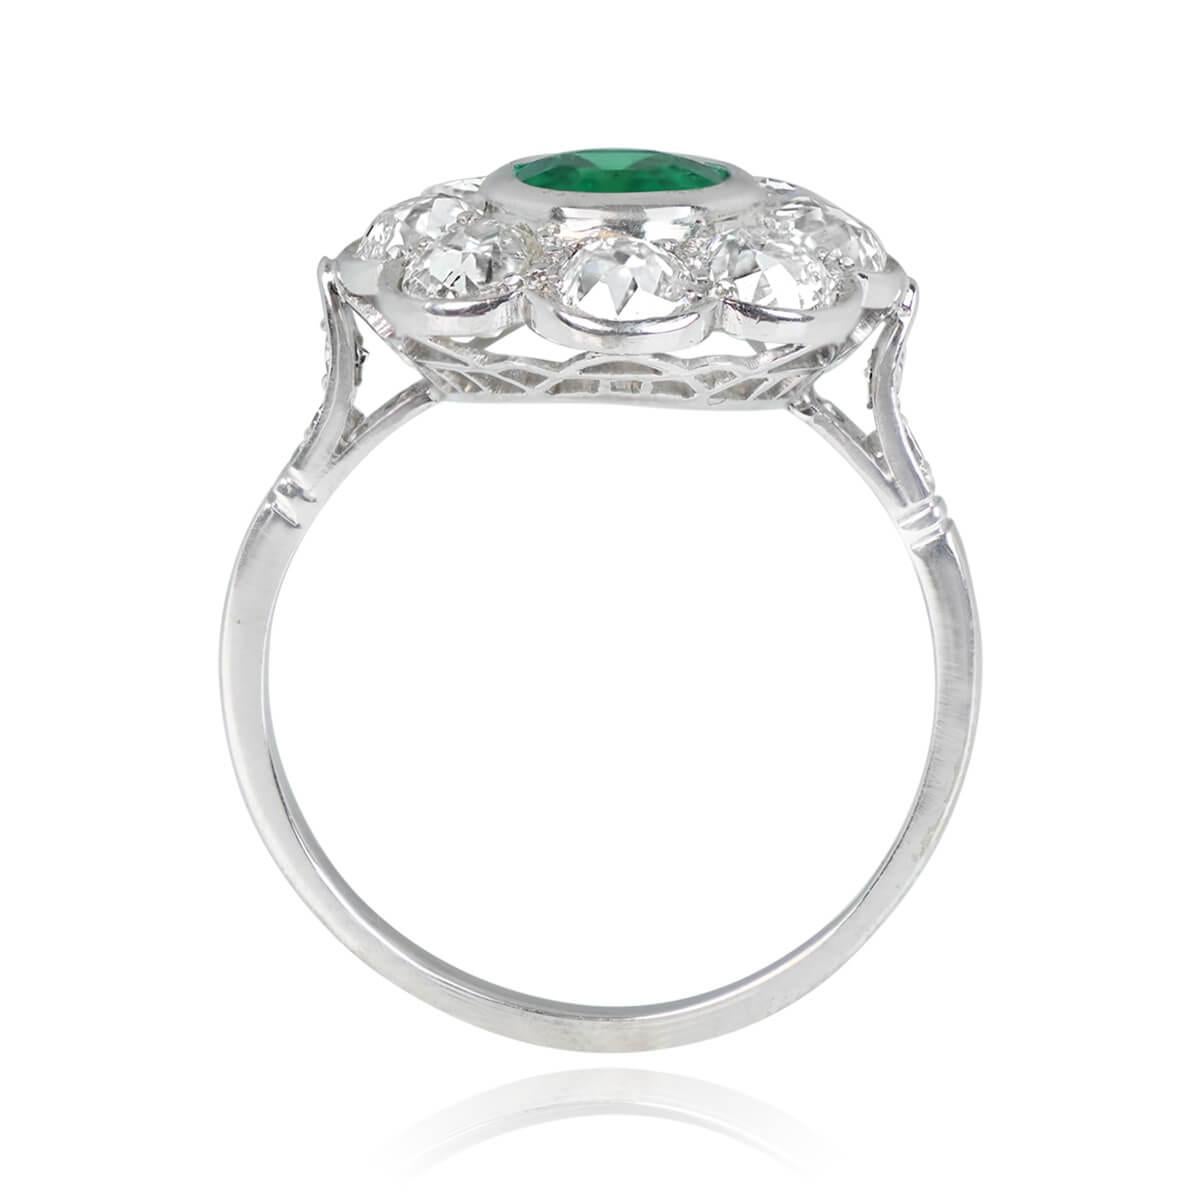 An alluring French antique gemstone ring showcases a 1.00-carat oval-cut natural Colombian emerald, set within a bezel. Encircling the gemstone is a floral halo composed of old European cut diamonds. Further enhancing the ring are single-cut